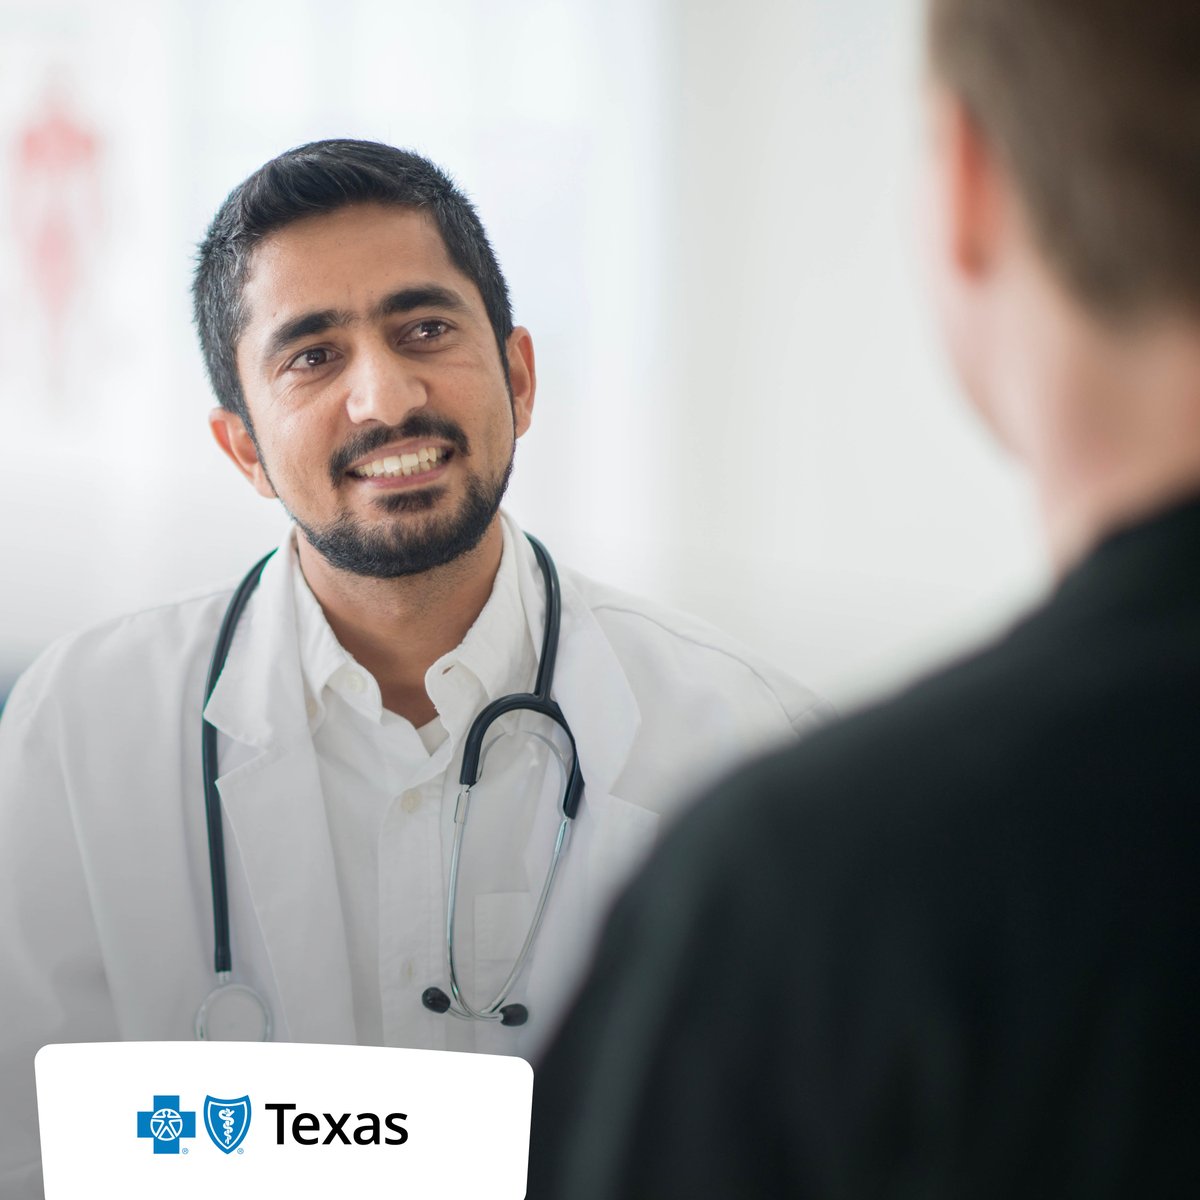 Colon cancer is one of the most common forms of cancer, but it can be detected early on with regular screenings. Click to learn more about how to discuss different screening options with your doctor. spr.ly/6012ktWt0